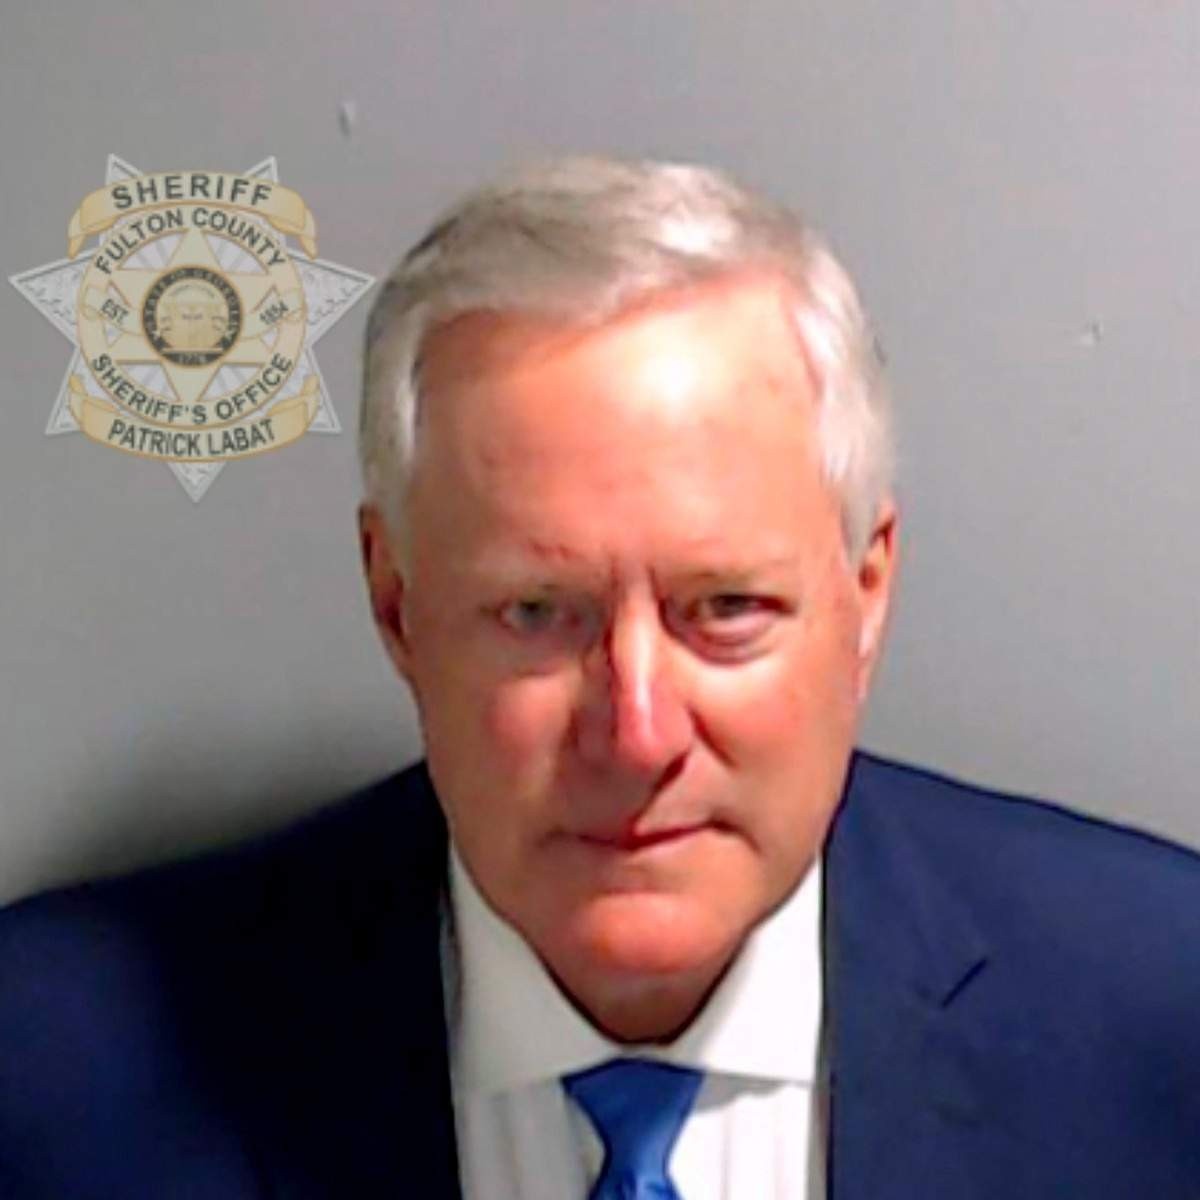  ATLANTA, GEORGIA - AUGUST 24: In this handout provided by the Fulton County Sheriff's Office, former White House Chief of Staff Mark Meadows poses for his booking photo on August 24, 2023 in Atlanta, Georgia. Former President Donald Trump and 18 others facing felony charges in the indictment related to tampering with the 2020 election in Georgia have been ordered to turn themselves in by August 25.   Fulton County Sheriff's Office via Getty Images/AFP (Photo by Handout / GETTY IMAGES NORTH AMERICA / Getty Images via AFP)       